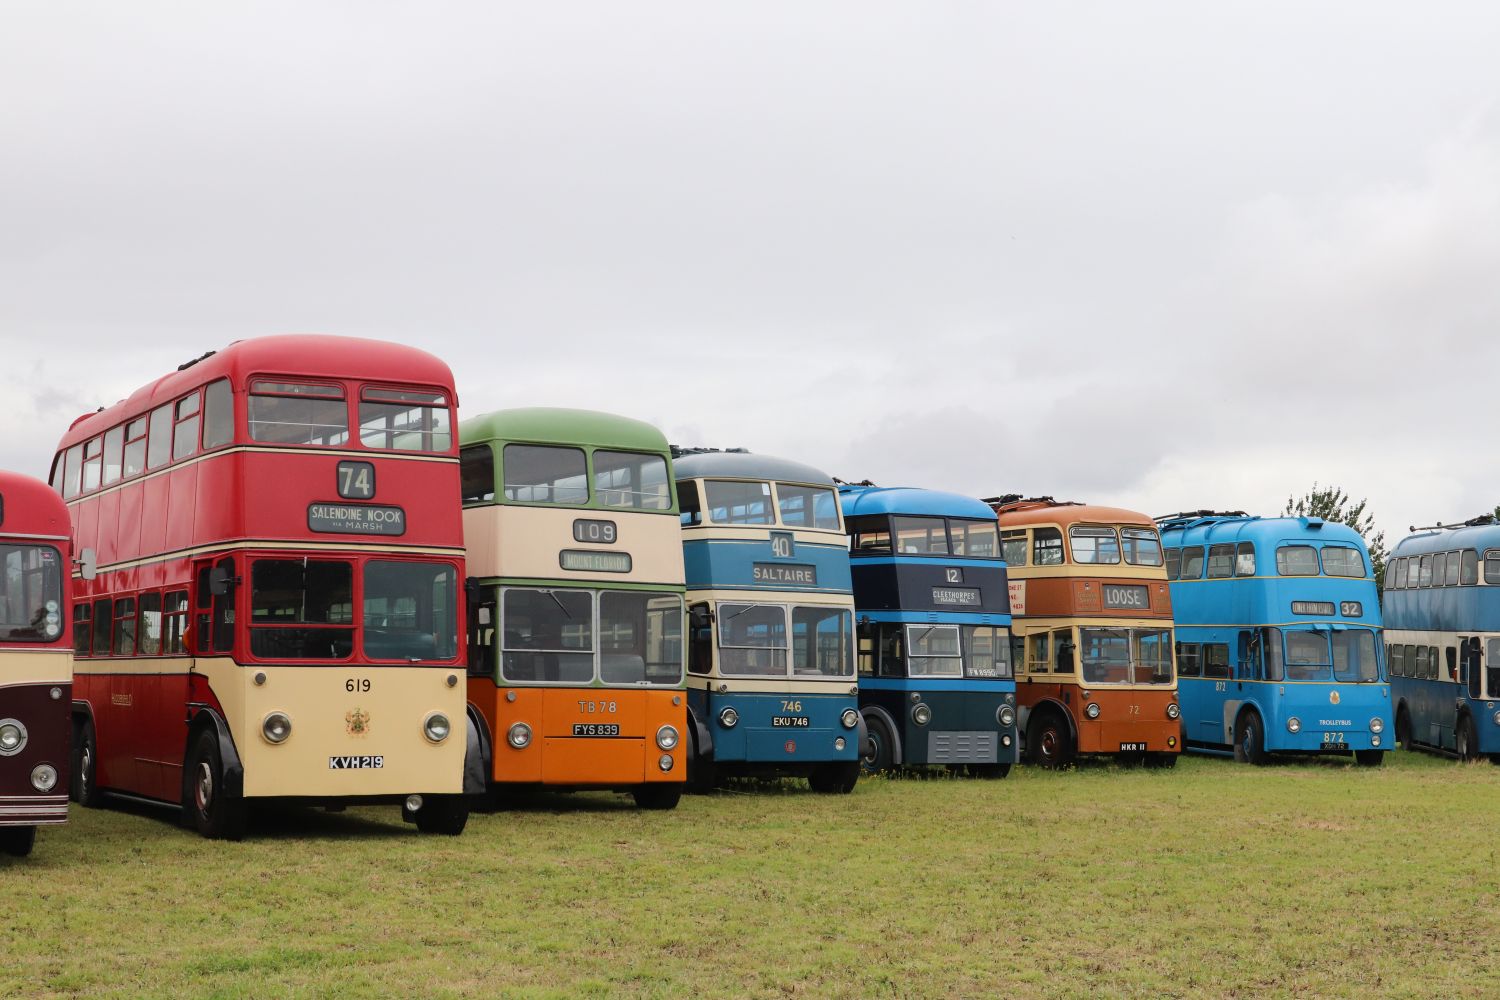 Not all of the trolleybuses at Sandtoft can be in service at the same time, there are usually three running with regular changes during the day to give those visiting more variety. Here are some of those not in service on the day